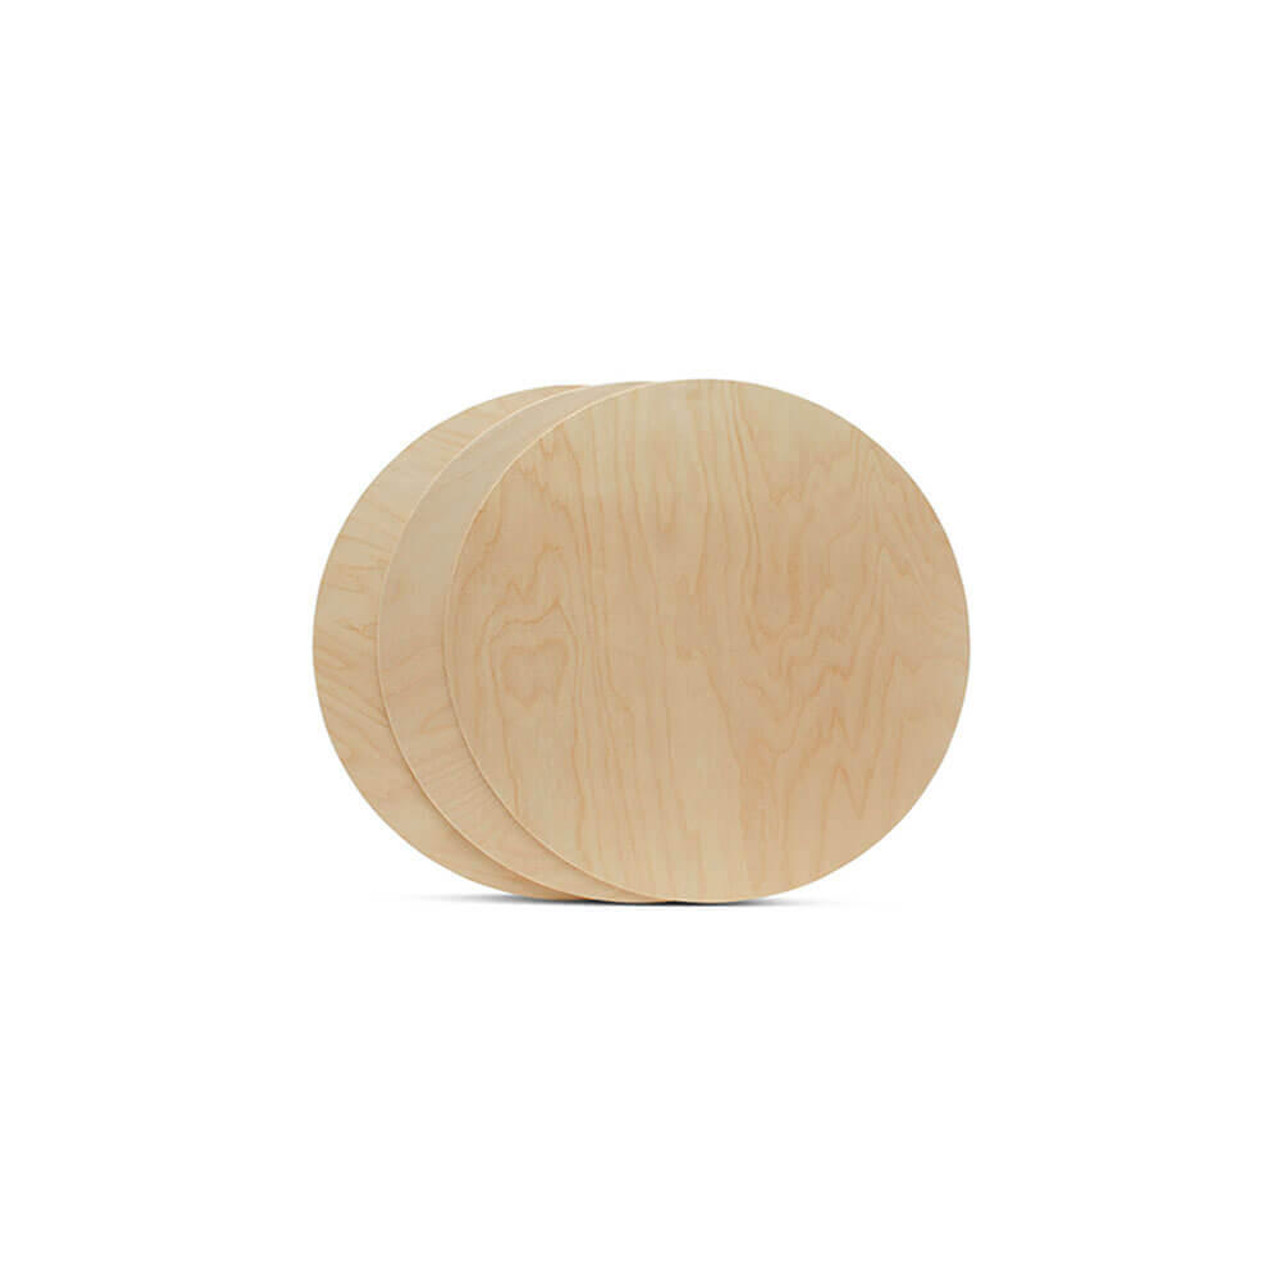 Unfinished Wooden Circles 12 inch, Pack of 25 Round Wood Plaques